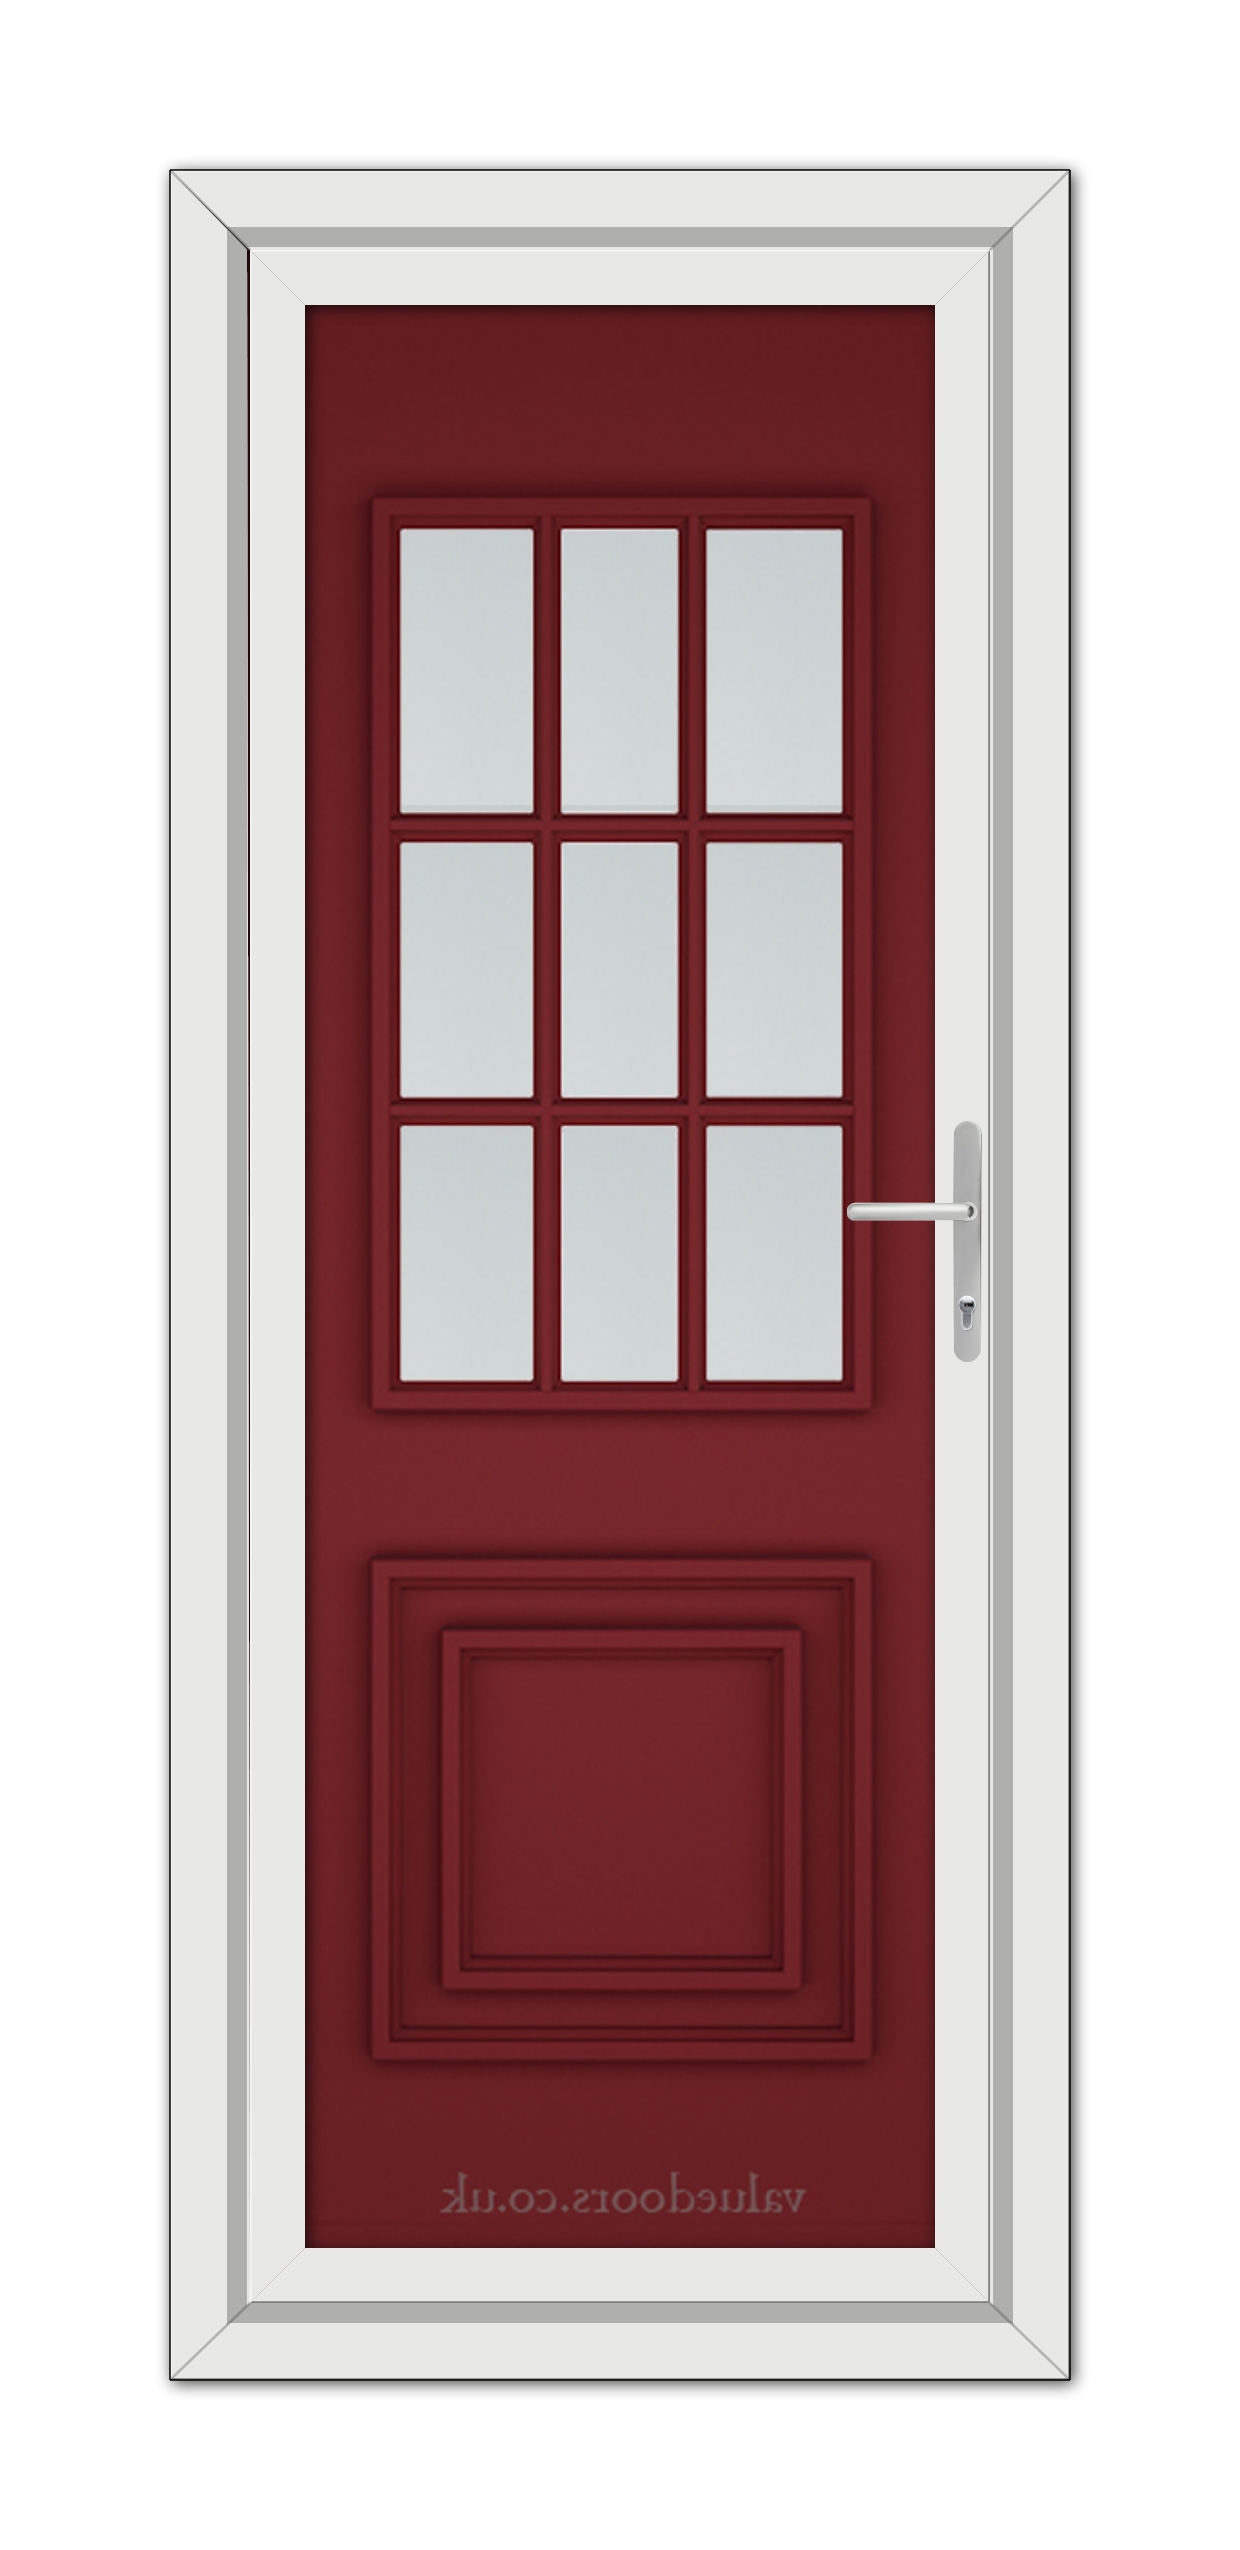 A Red Cambridge One uPVC Door with glass panes.